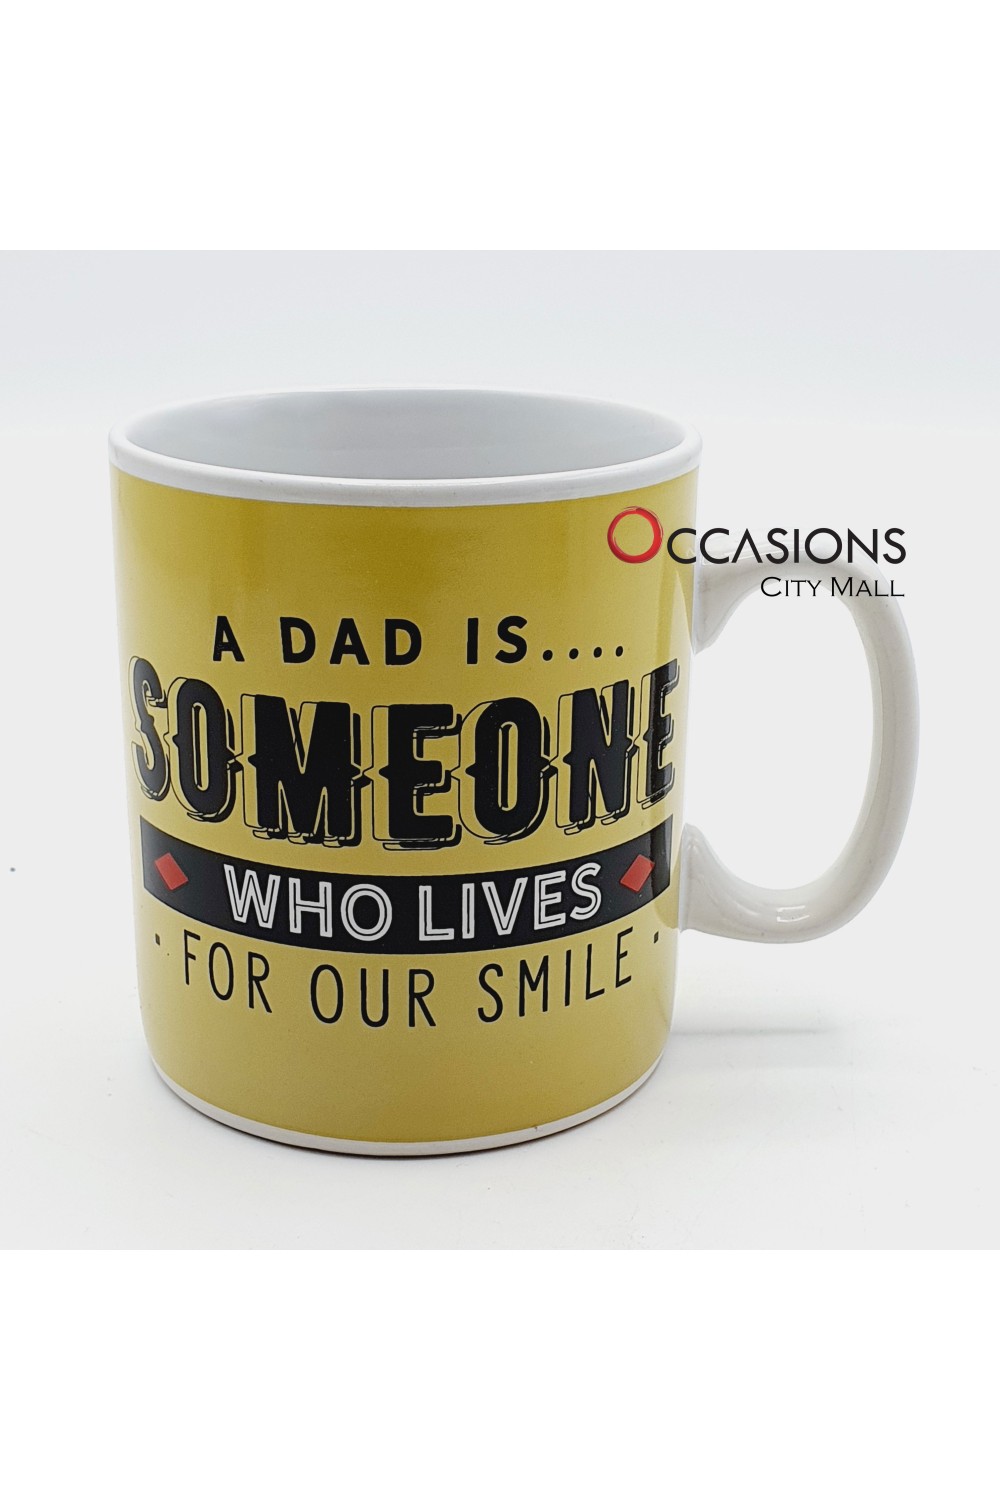 A Dad is Someone - Jumbo size